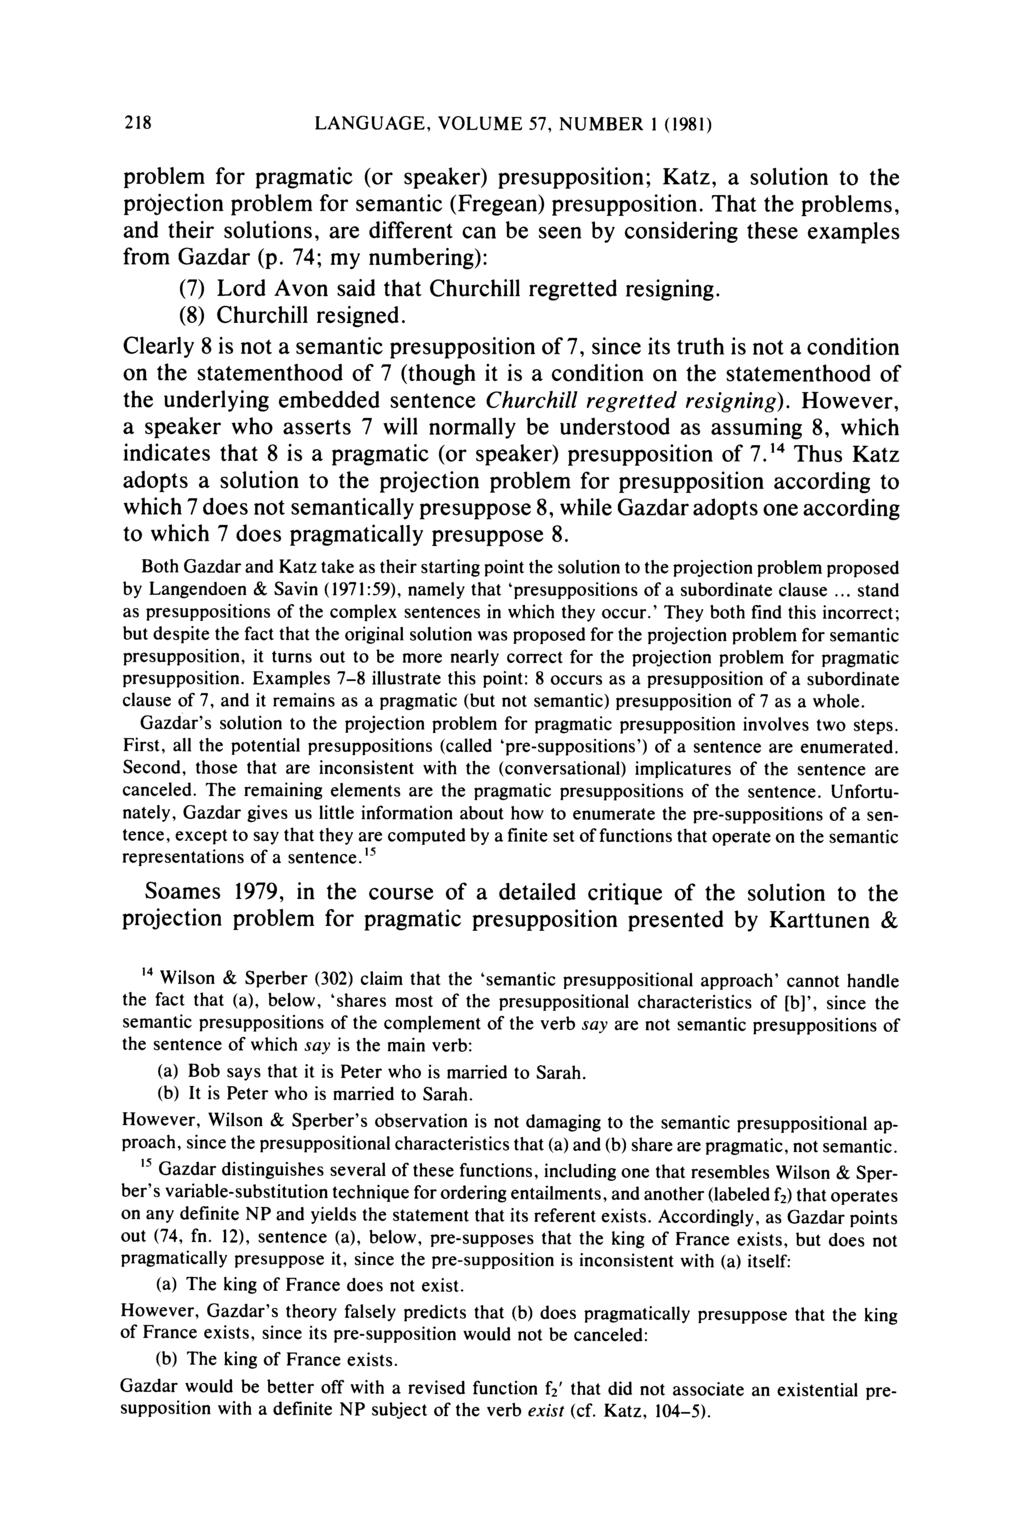 218 LANGUAGE, VOLUME 57, NUMBER 1 (1981) problem for pragmatic (or speaker) presupposition; Katz, a solution to the projection problem for semantic (Fregean) presupposition.